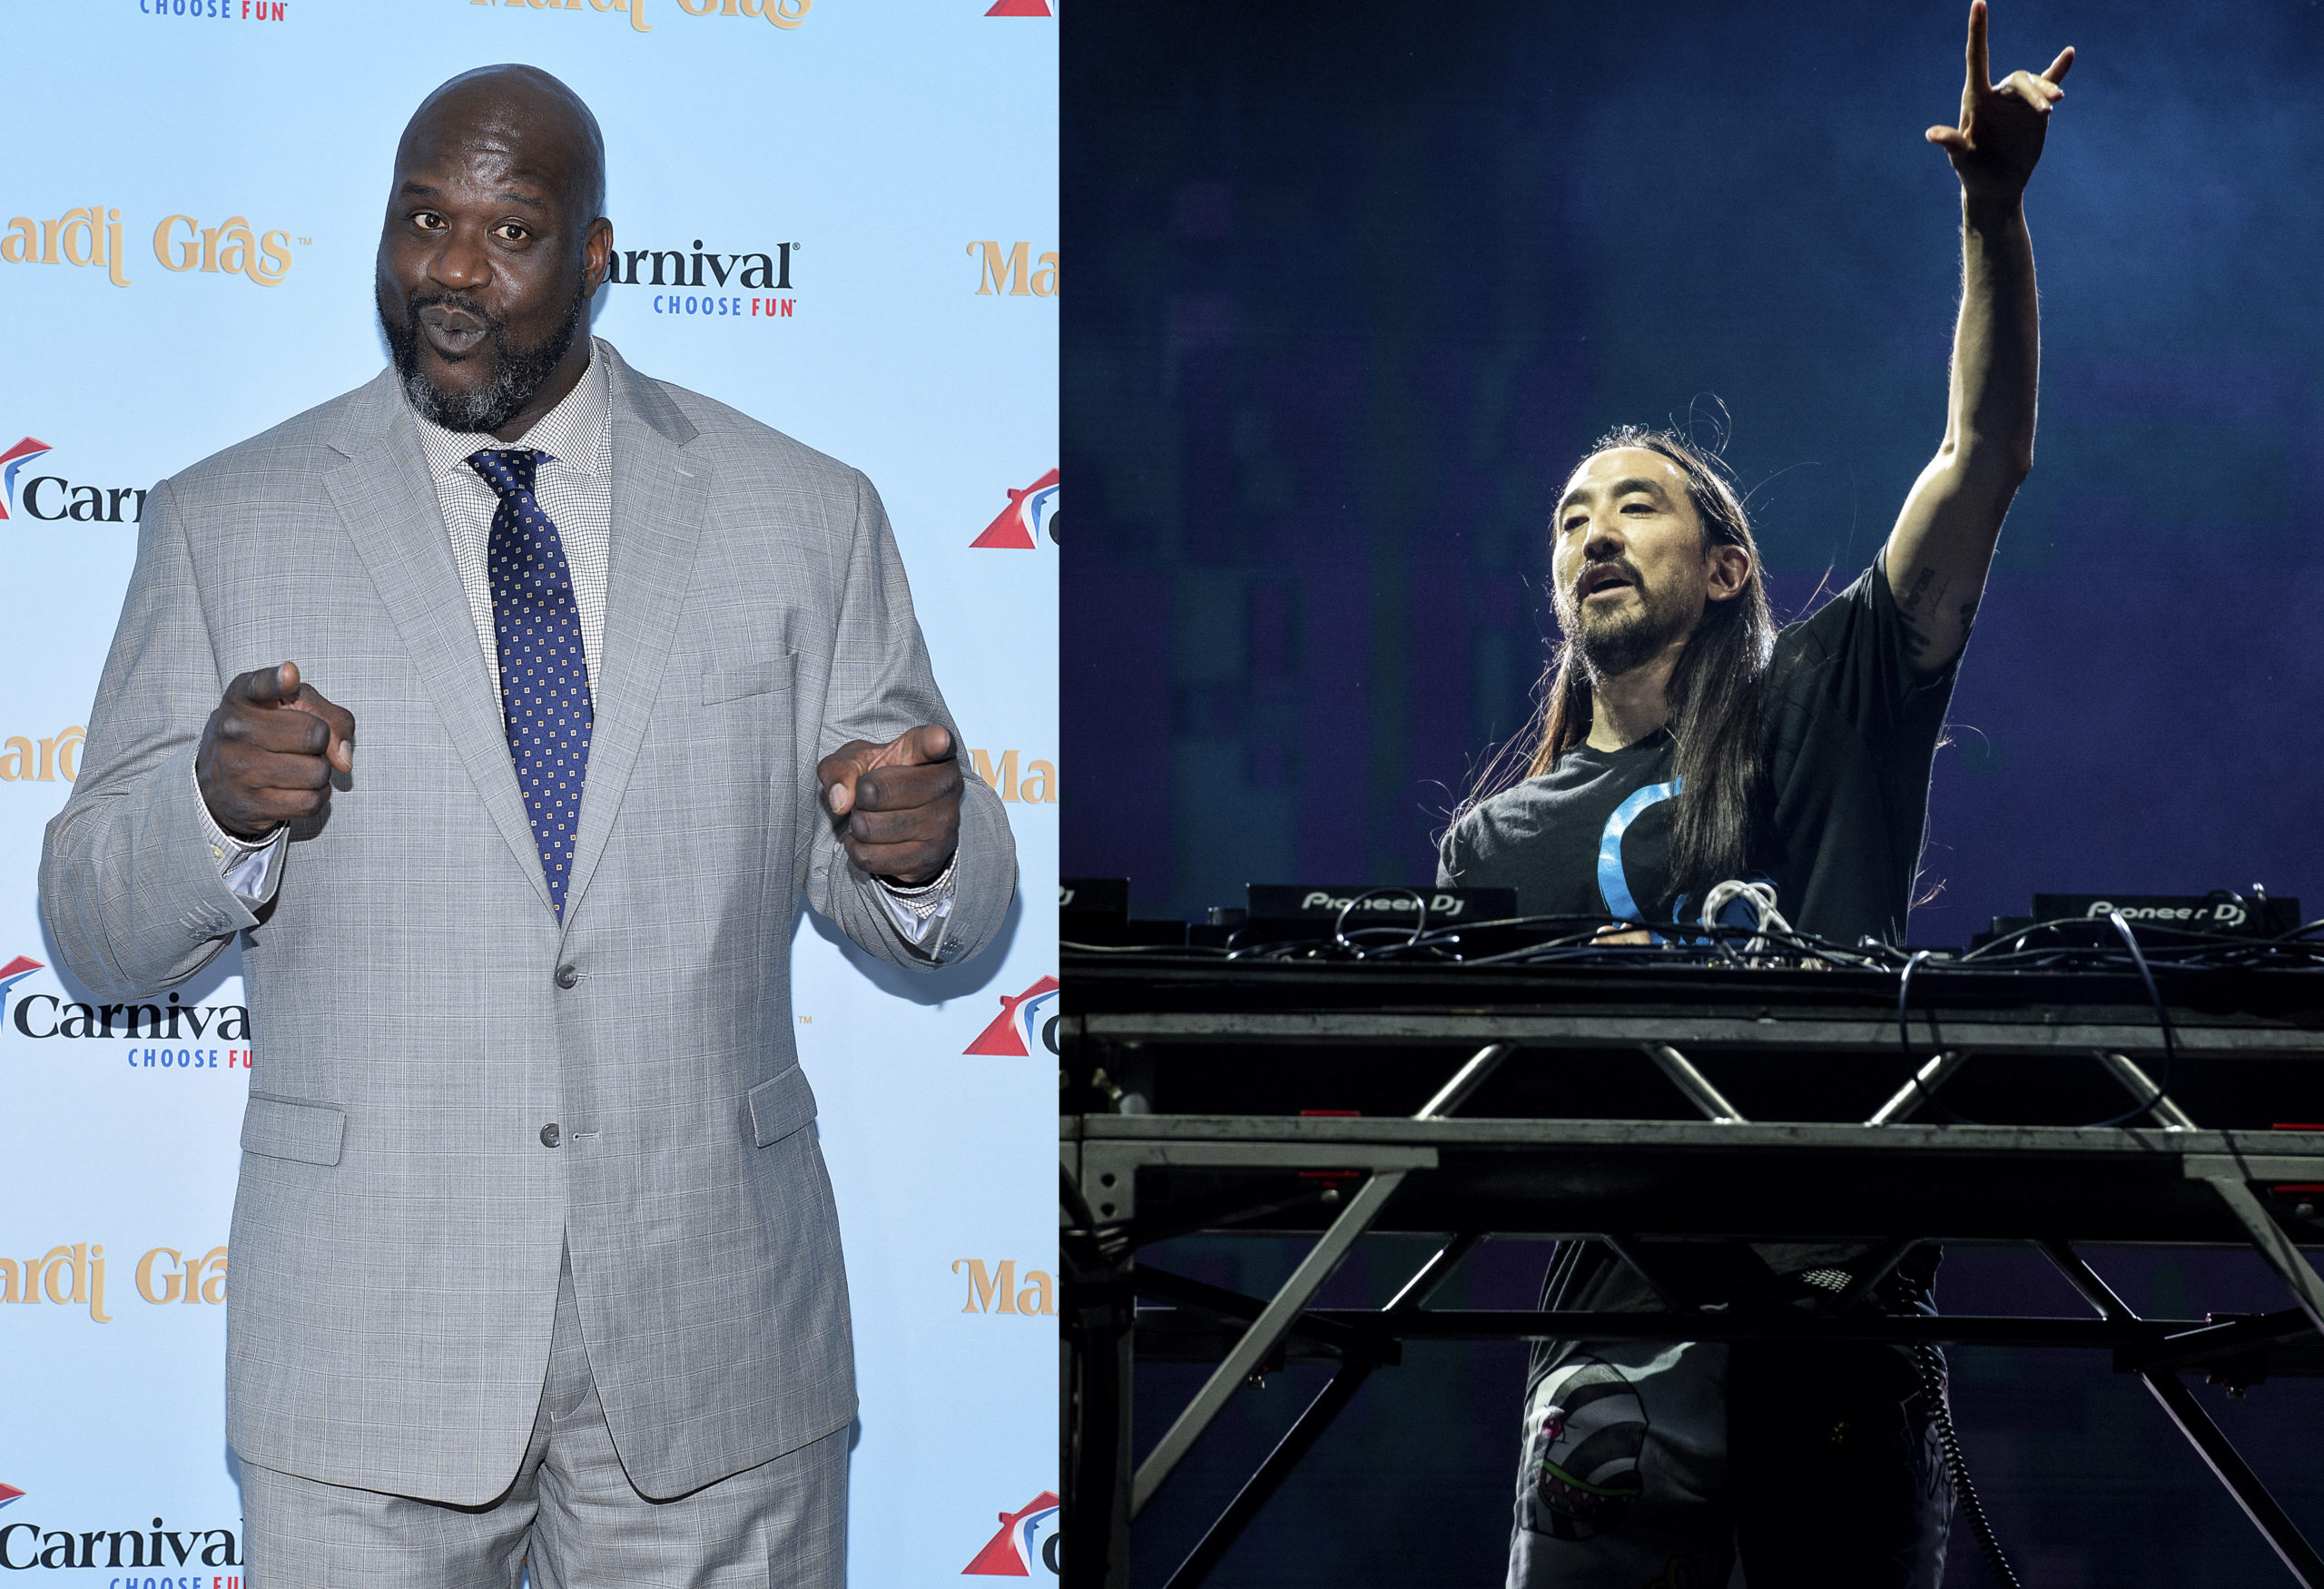 Hear Shaq collaborate with Steve Aoki for ‘Welcome to the Playhouse.’